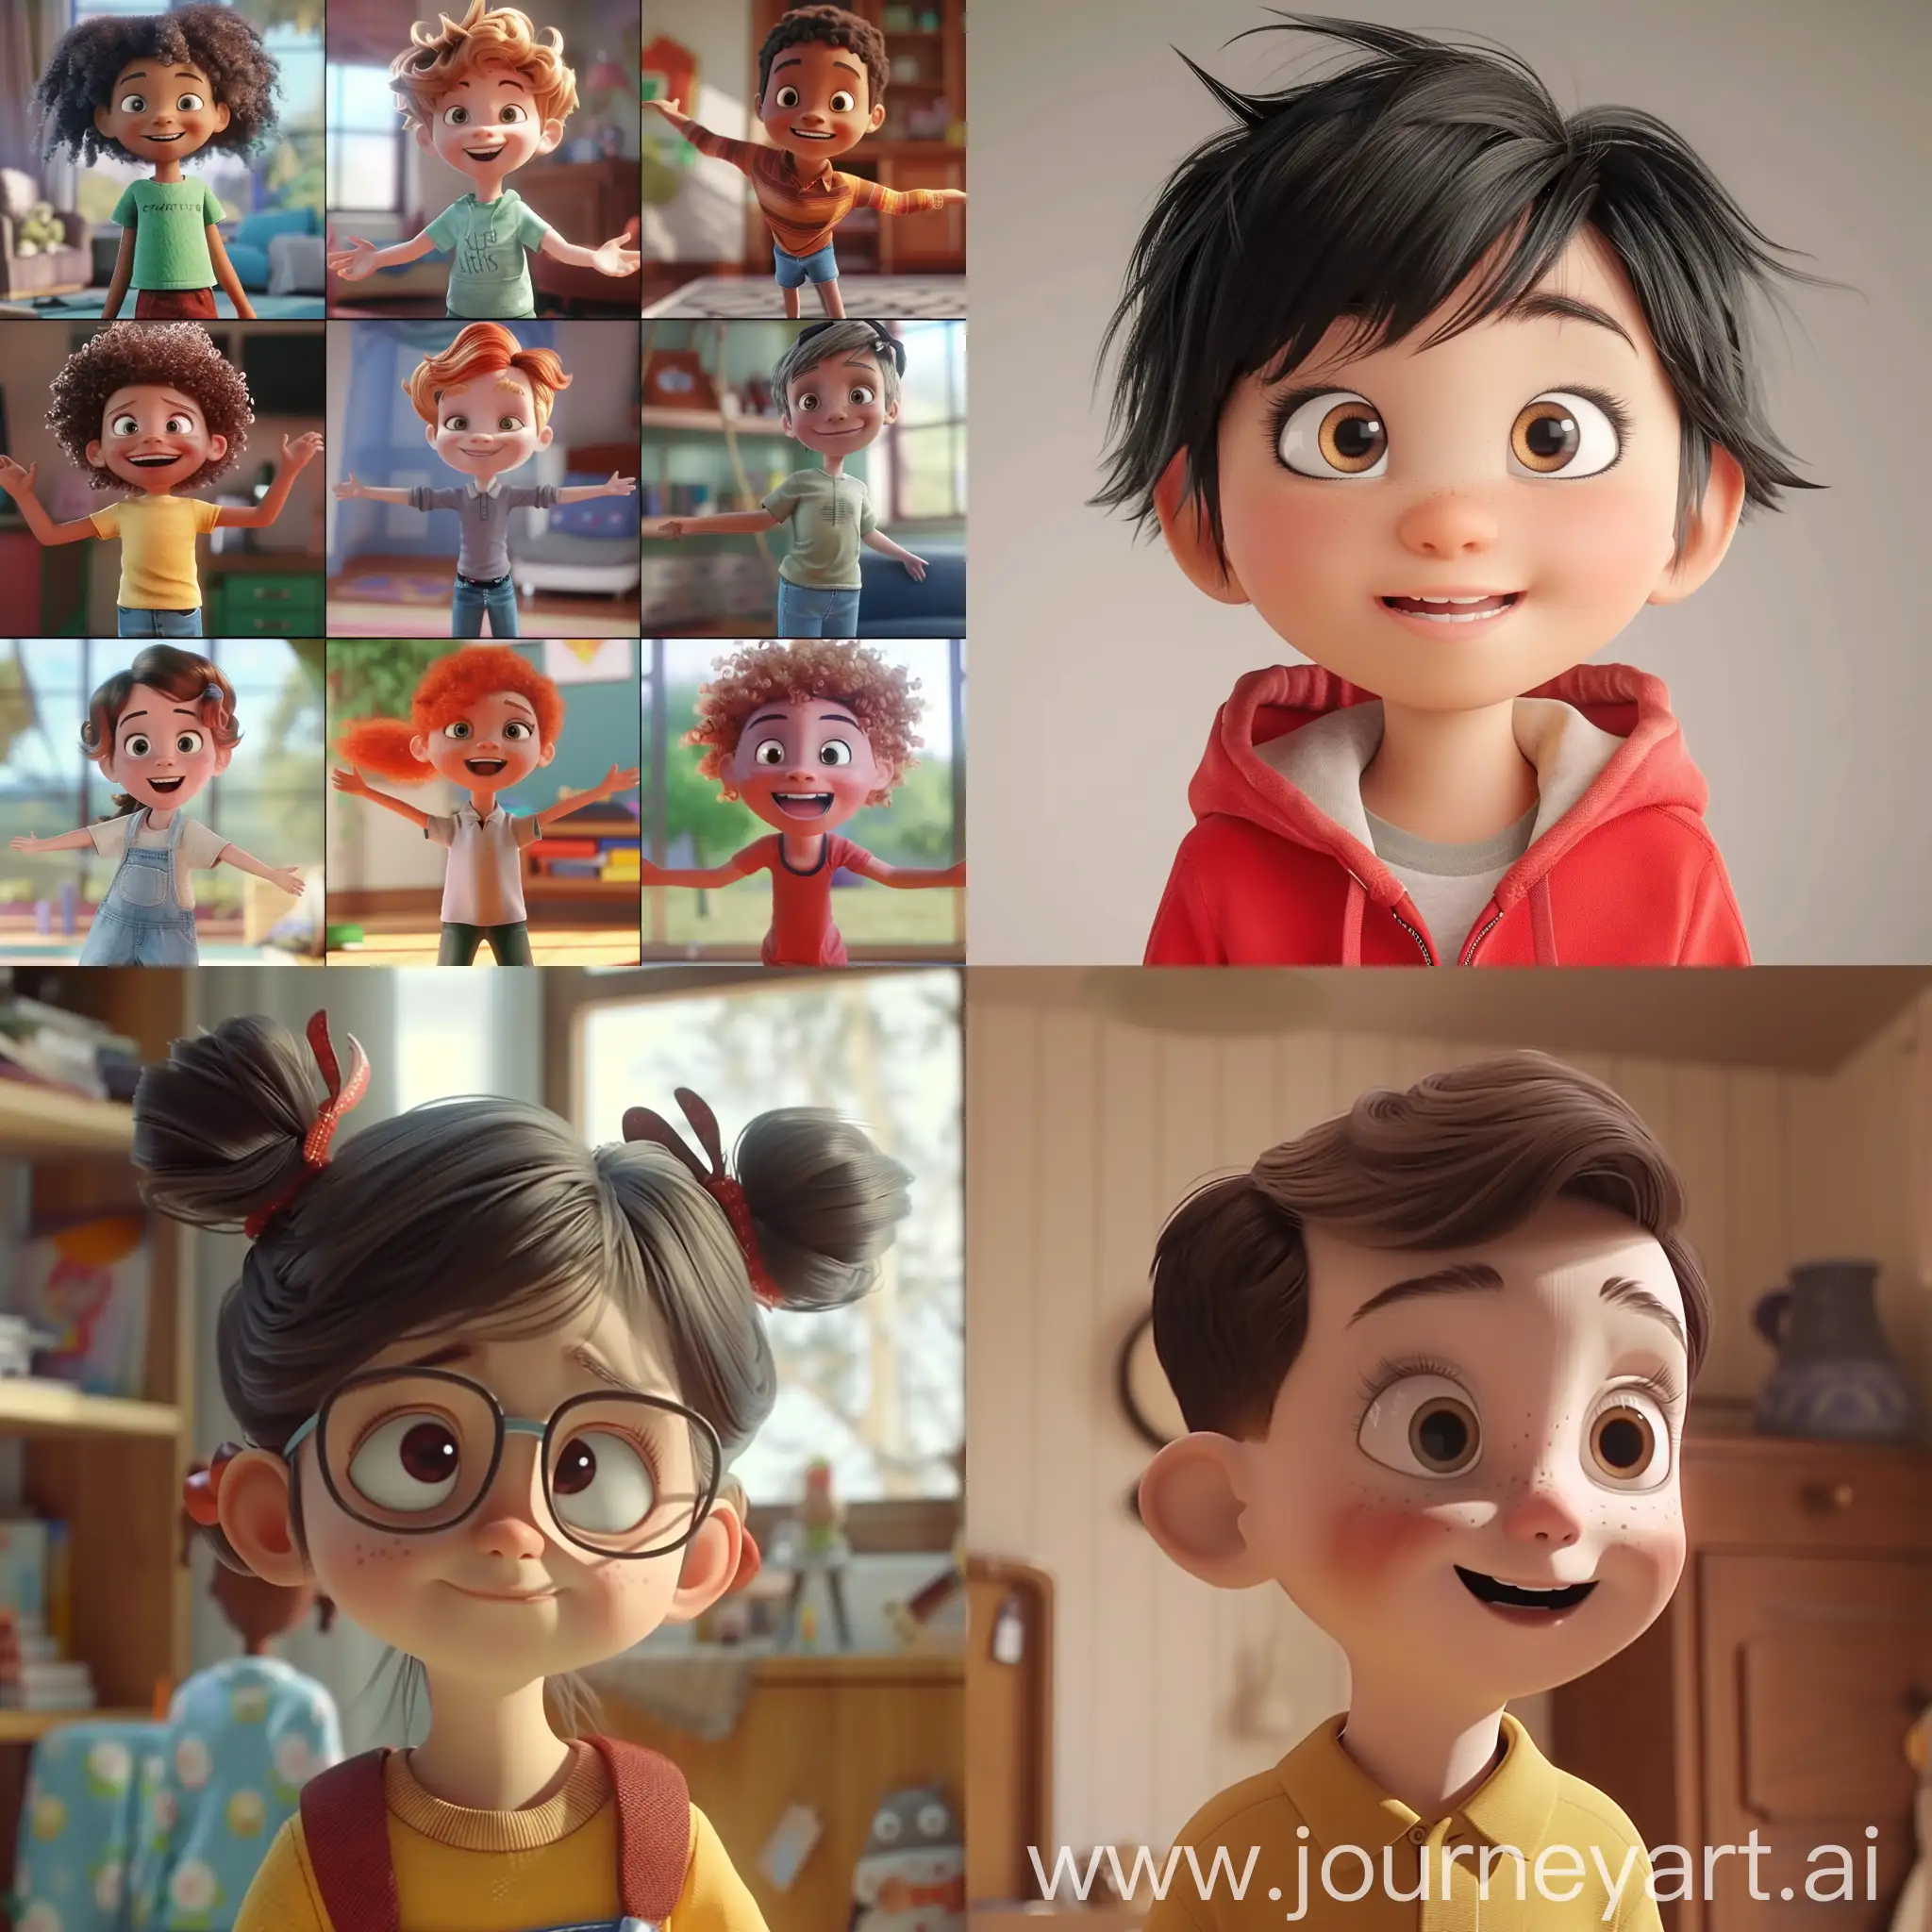 Whimsical-Childrens-Animation-Playful-Adventure-in-a-Square-Aspect-Ratio